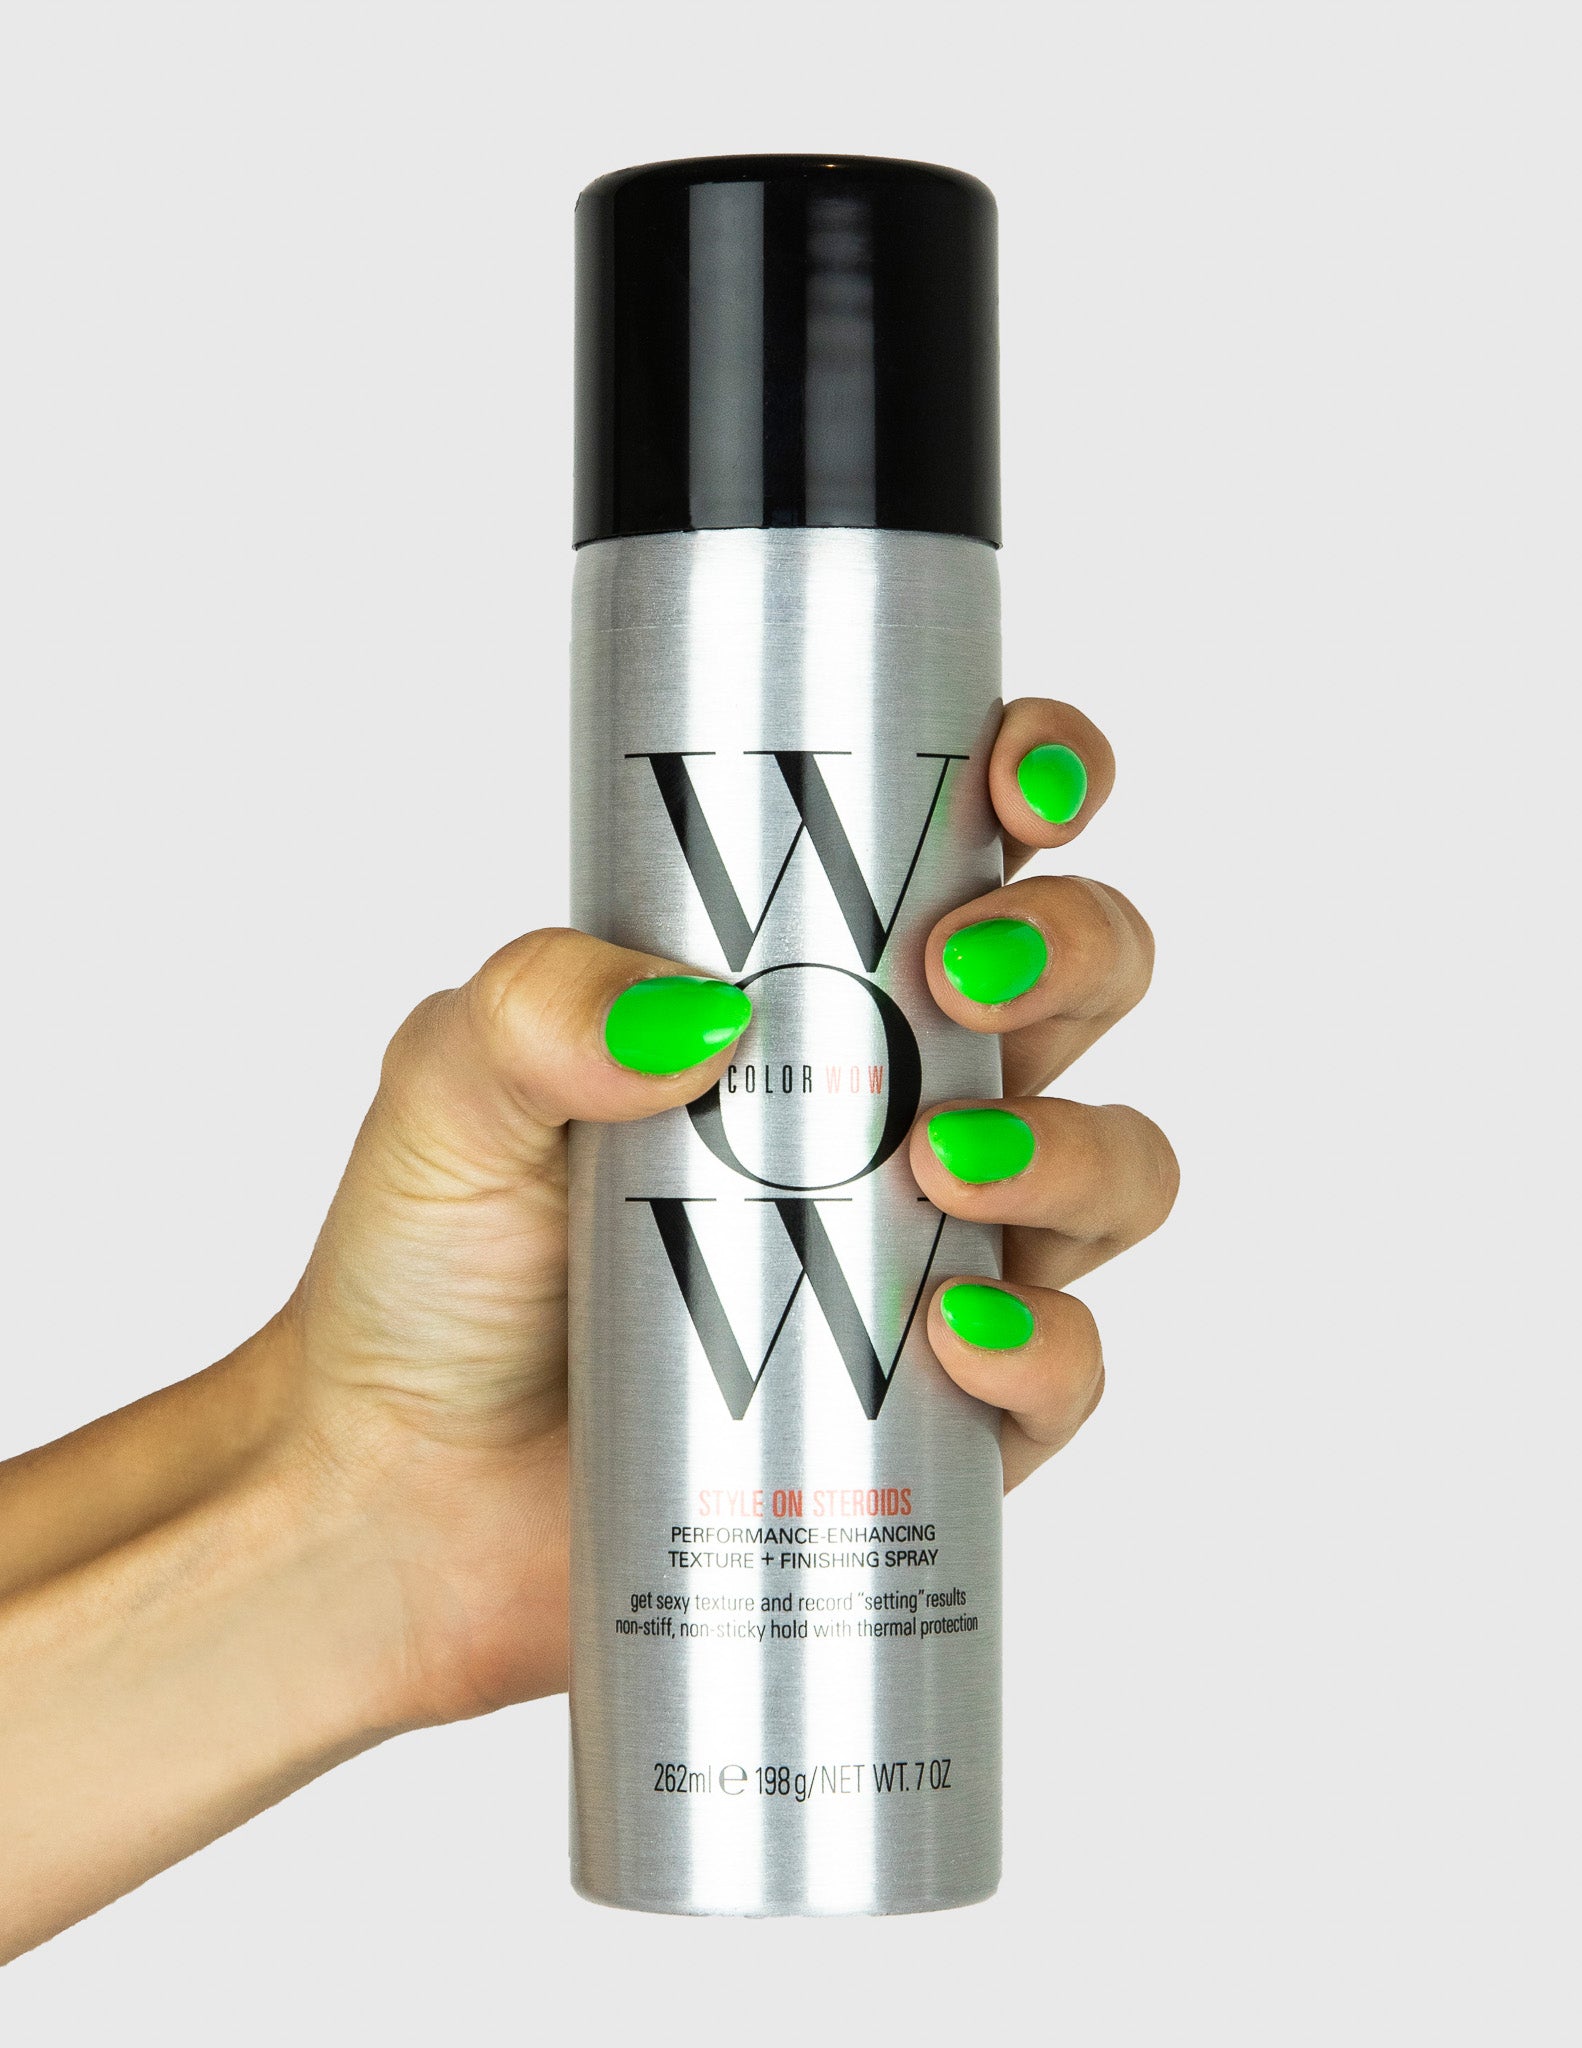 Color Wow - What's your type? Big voluminous hair or sleek and